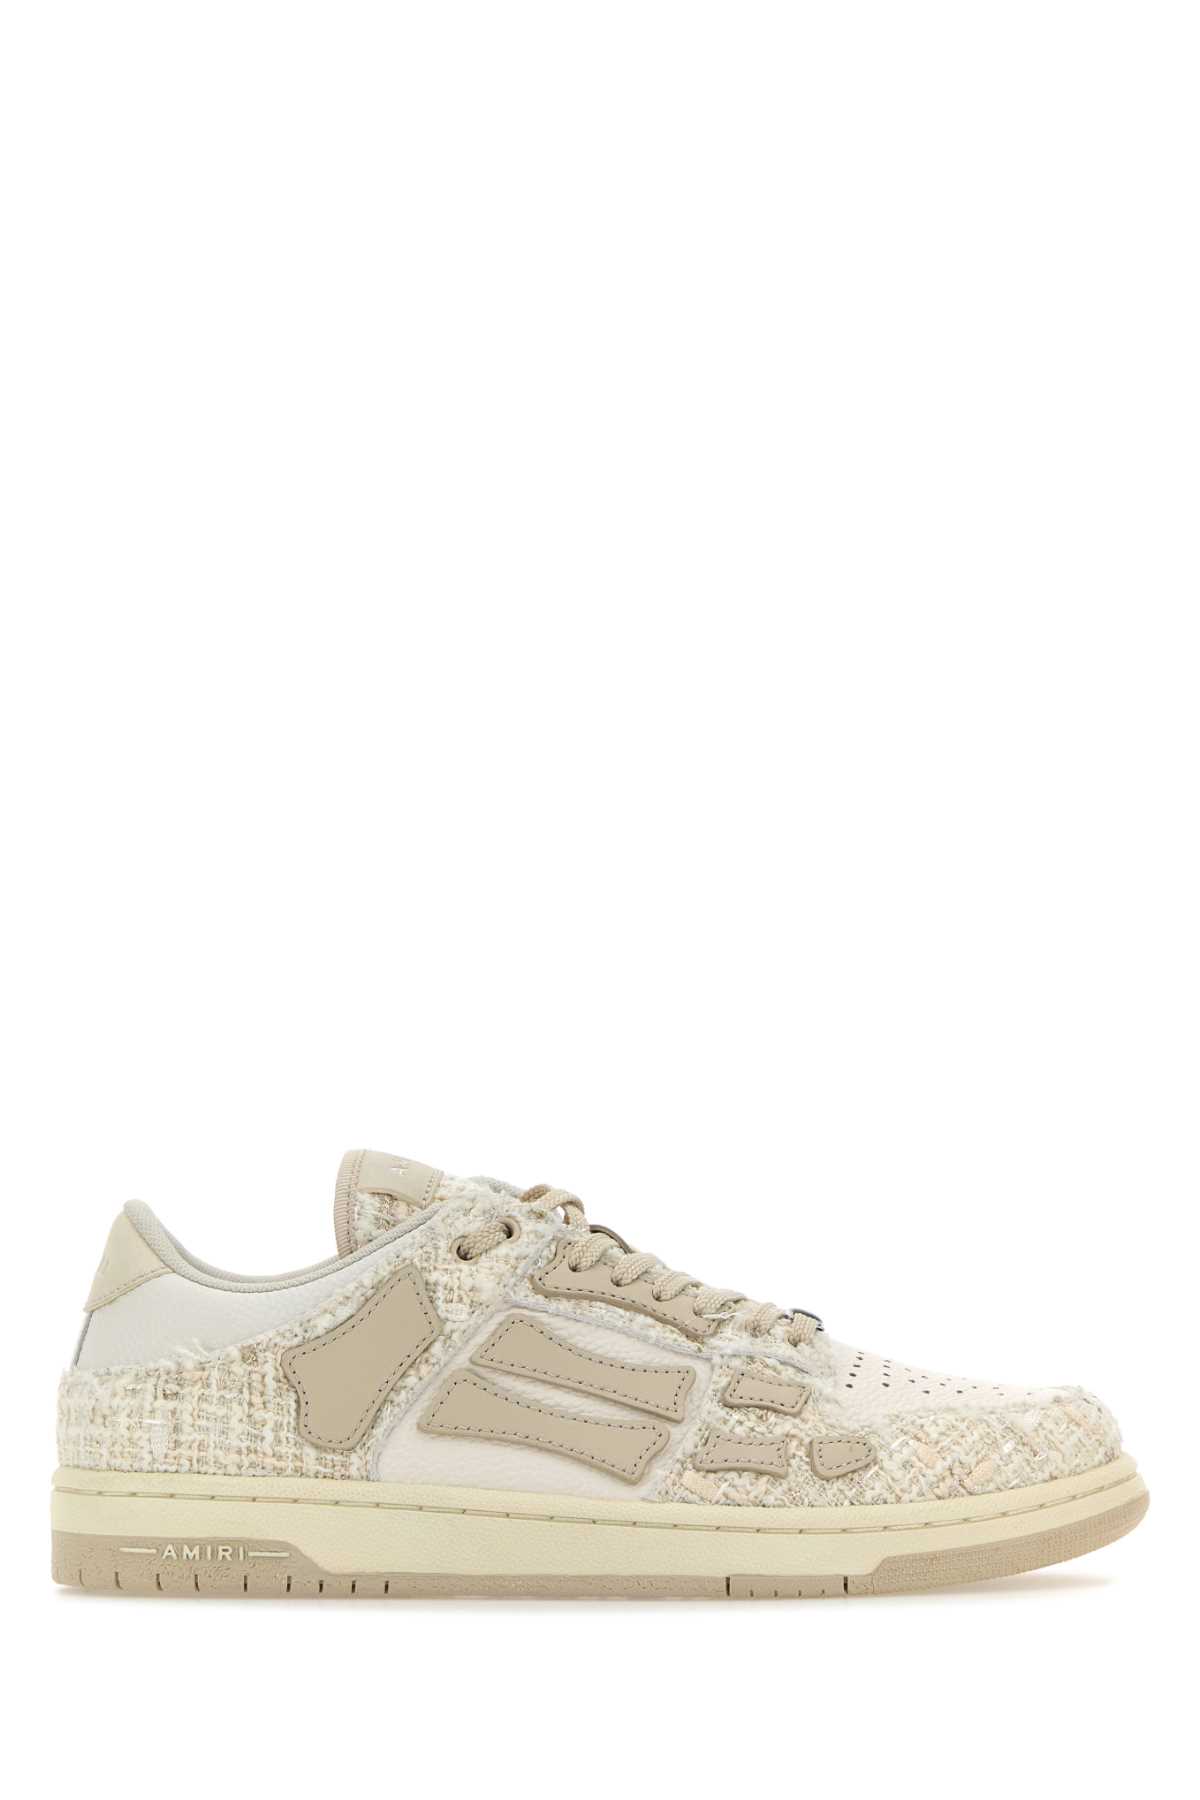 Shop Amiri Multicolor Leather And Fabric Skel Sneakers In Alabaster